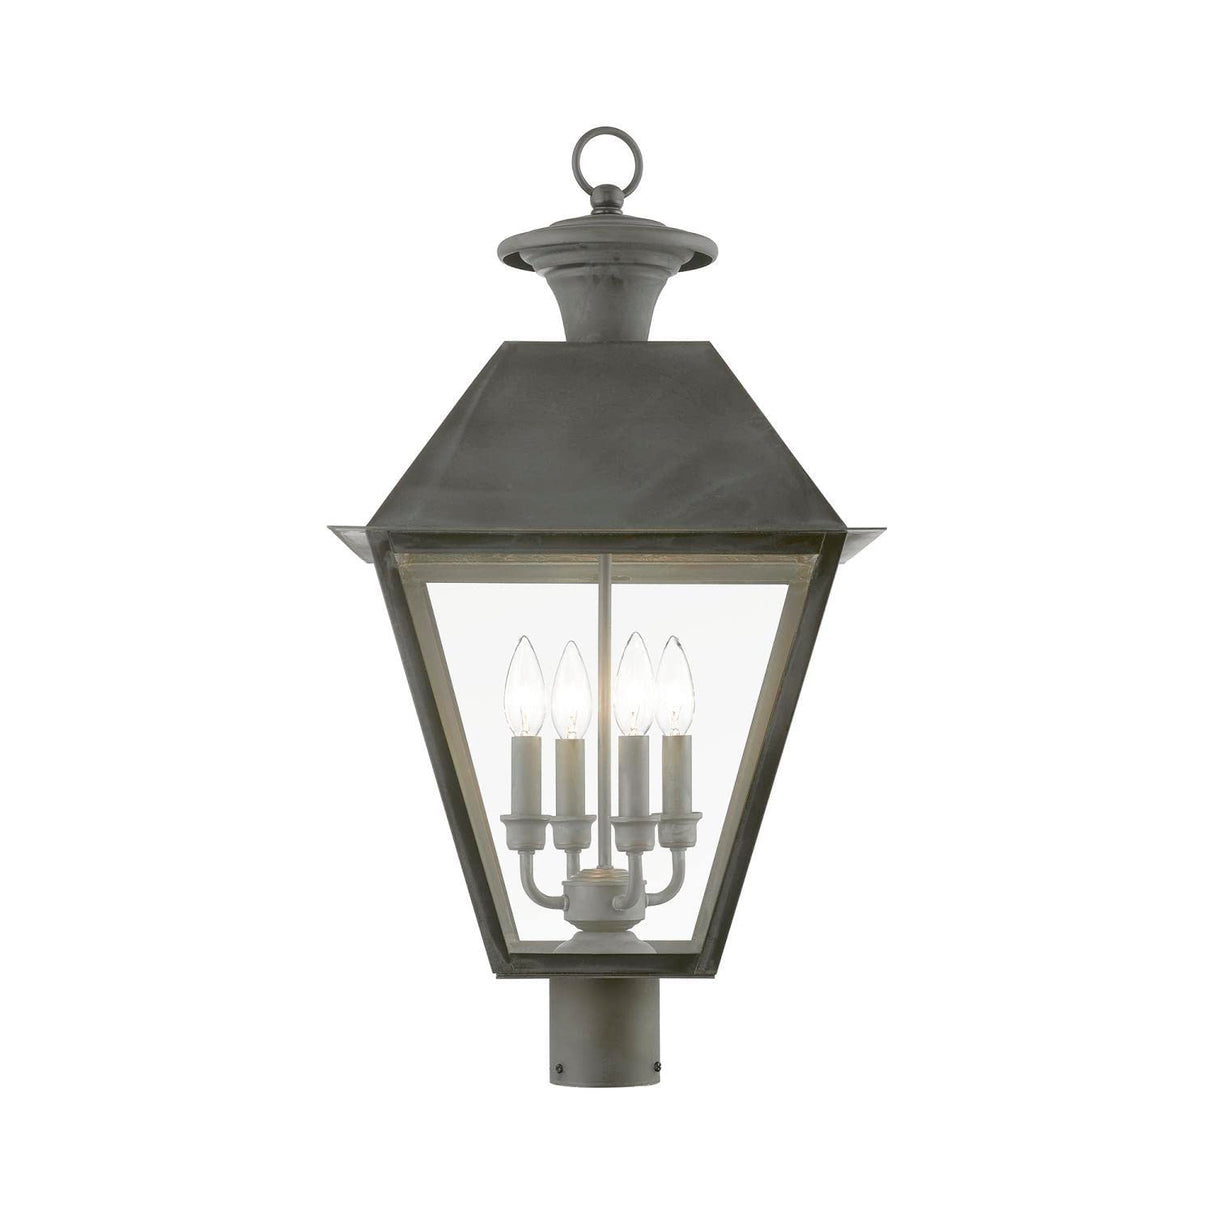 Livex Lighting 27223-61 Wentworth 4 Light 28 inch Charcoal Outdoor Post Top Lantern, Extra Large